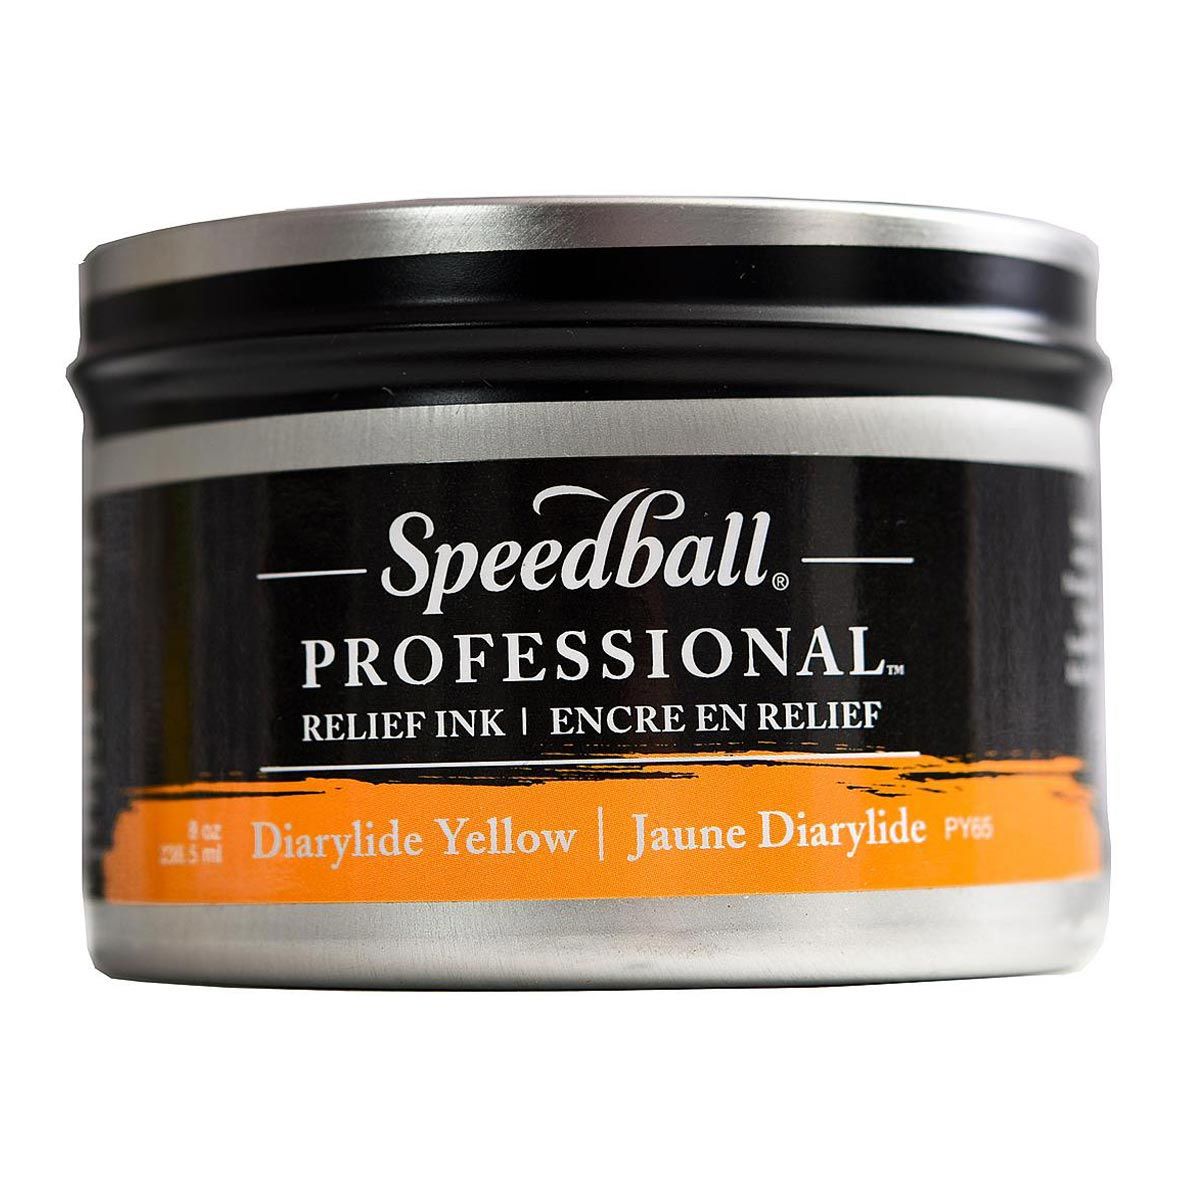 Speedball Professional Relief Ink - Diarylide Yellow 8 oz